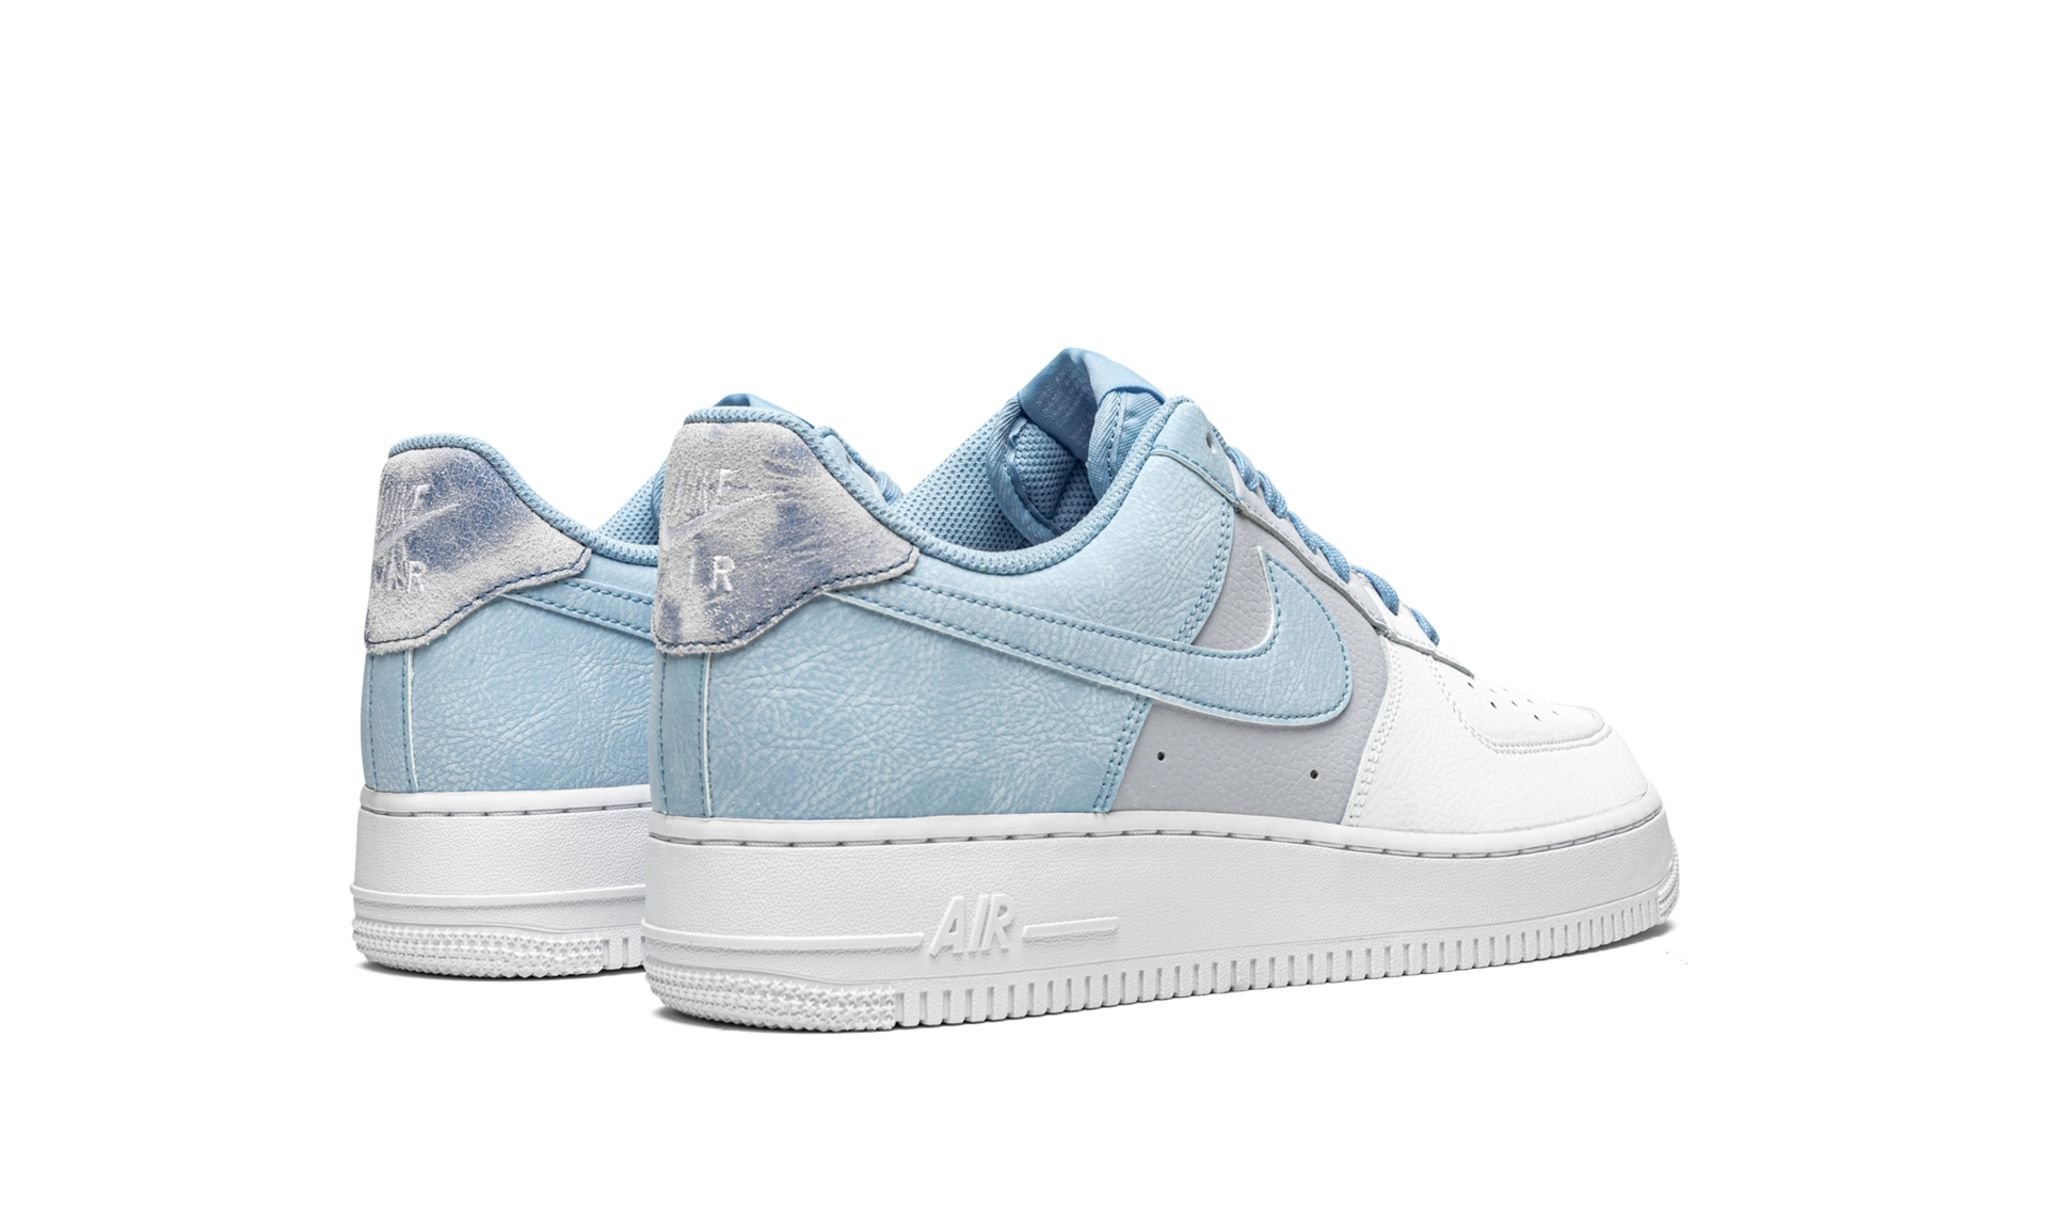 Air Force 1 '07 LV8 "Psychic Blue" - 3